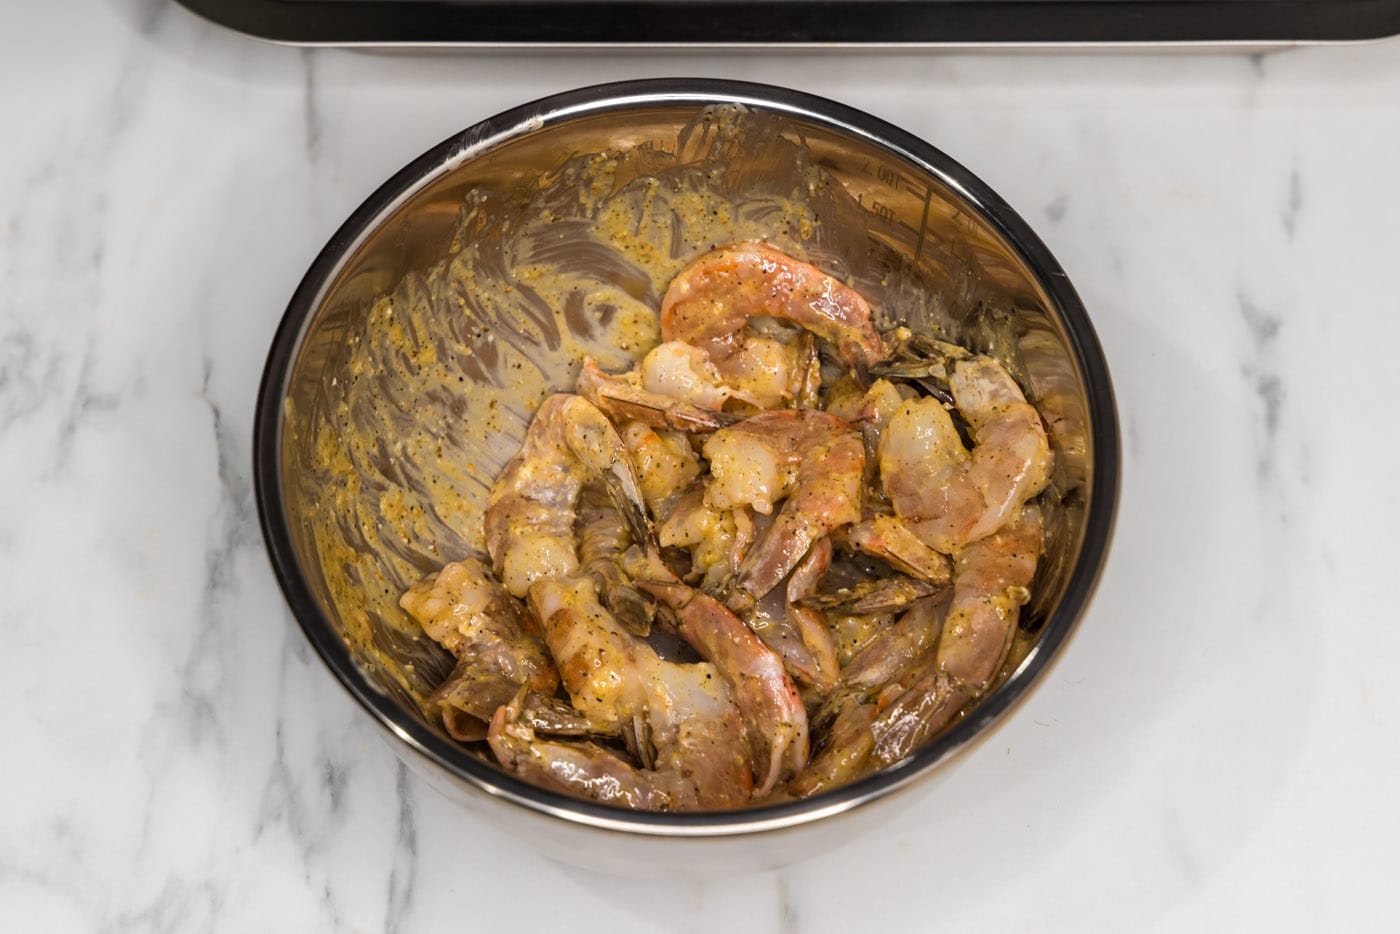 shrimp tossed in butter and old bay seasoning